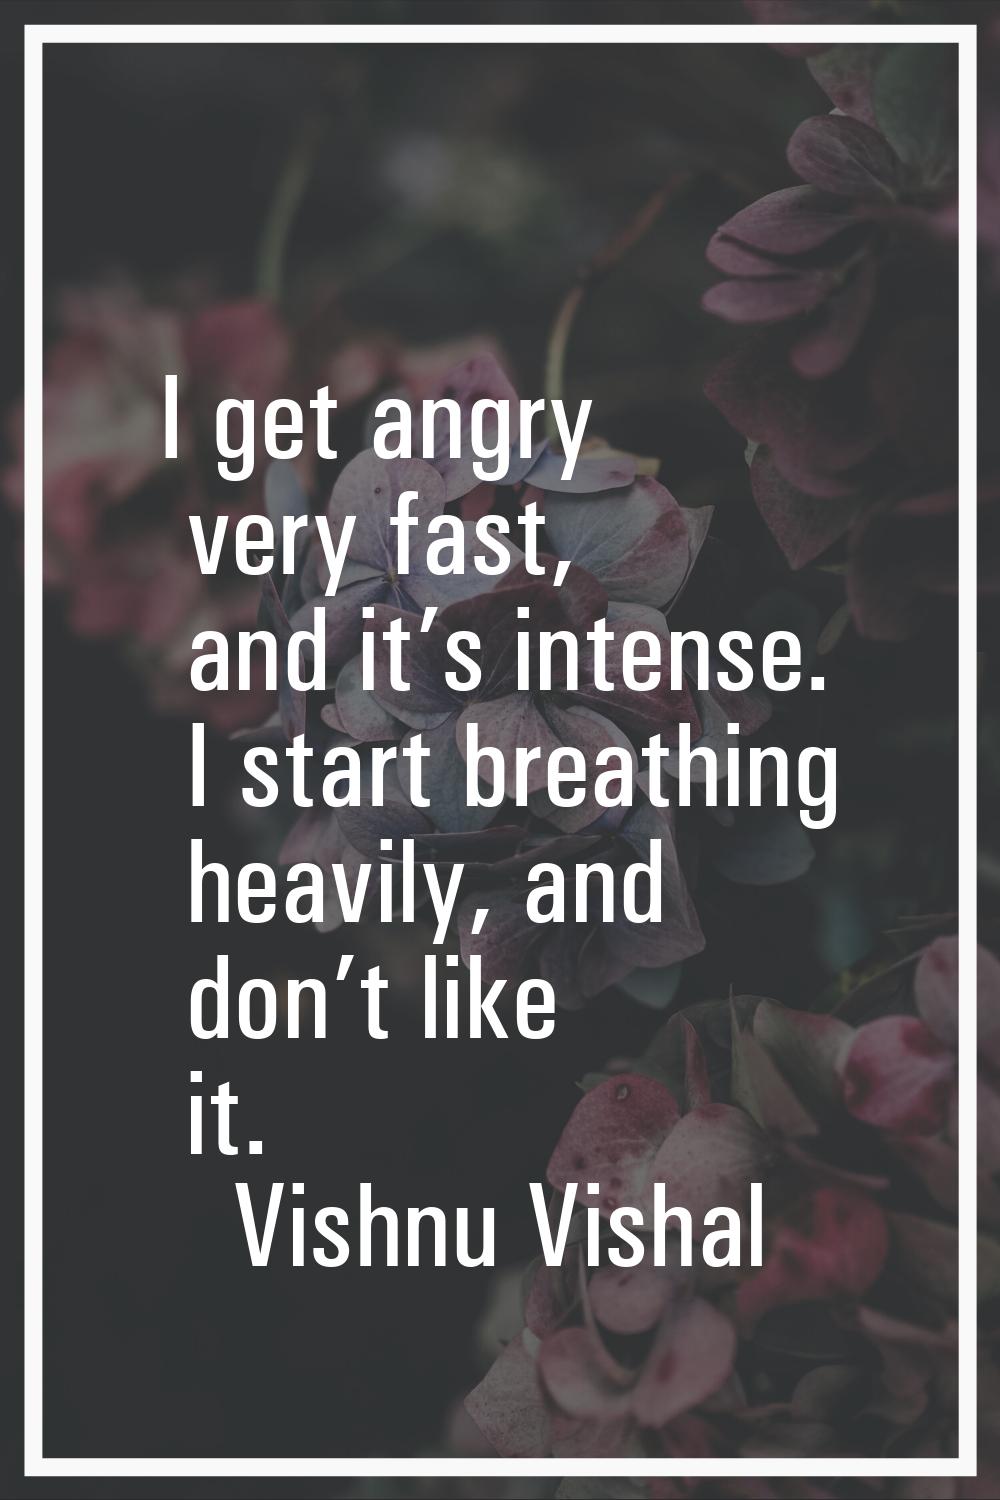 I get angry very fast, and it’s intense. I start breathing heavily, and don’t like it.